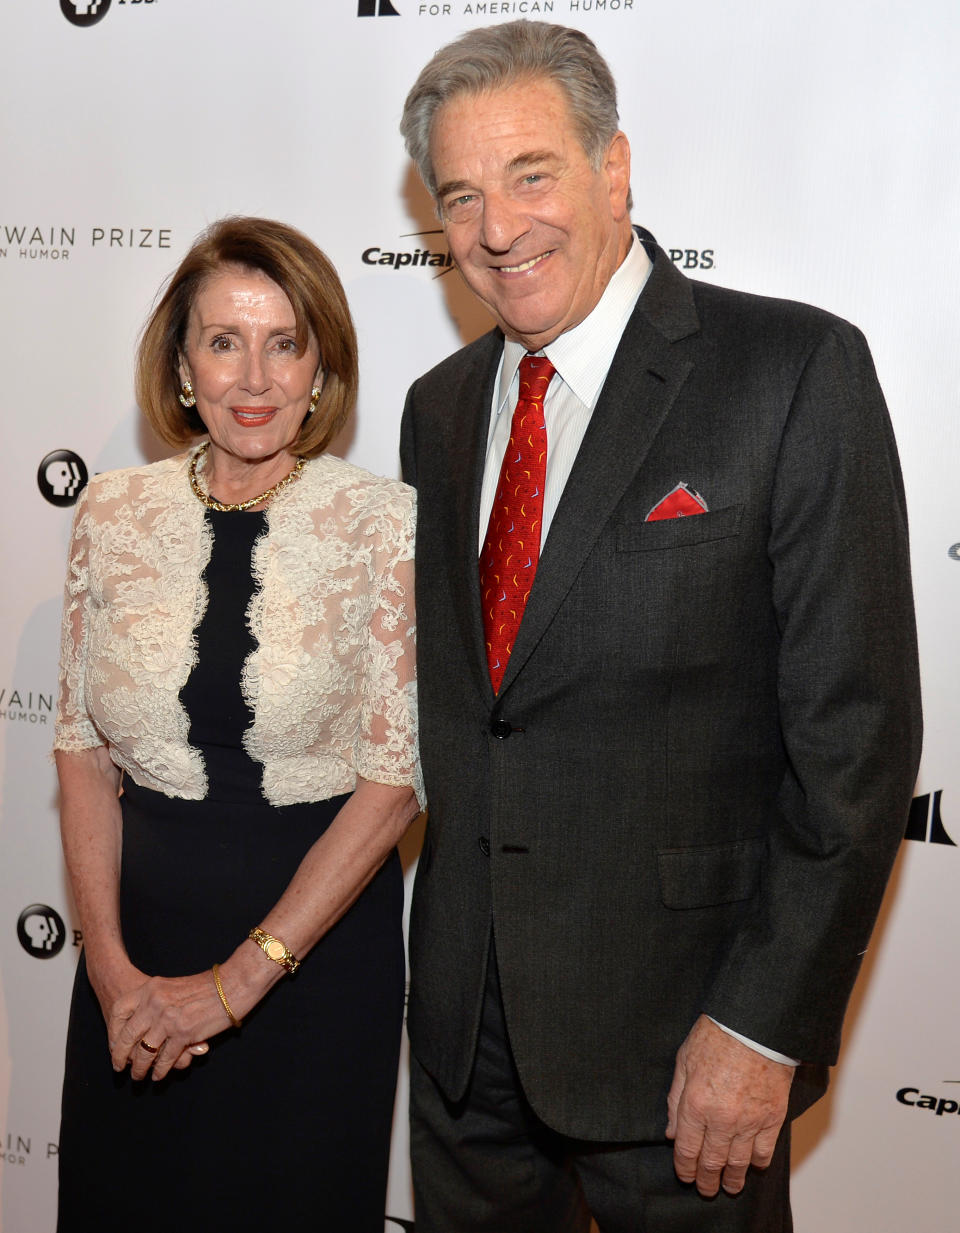 Nancy and Paul Pelosi pose for photographers in front of a red carpet wall carrying names of sponsors of the event, including: the American Fund, Capital and PBS.